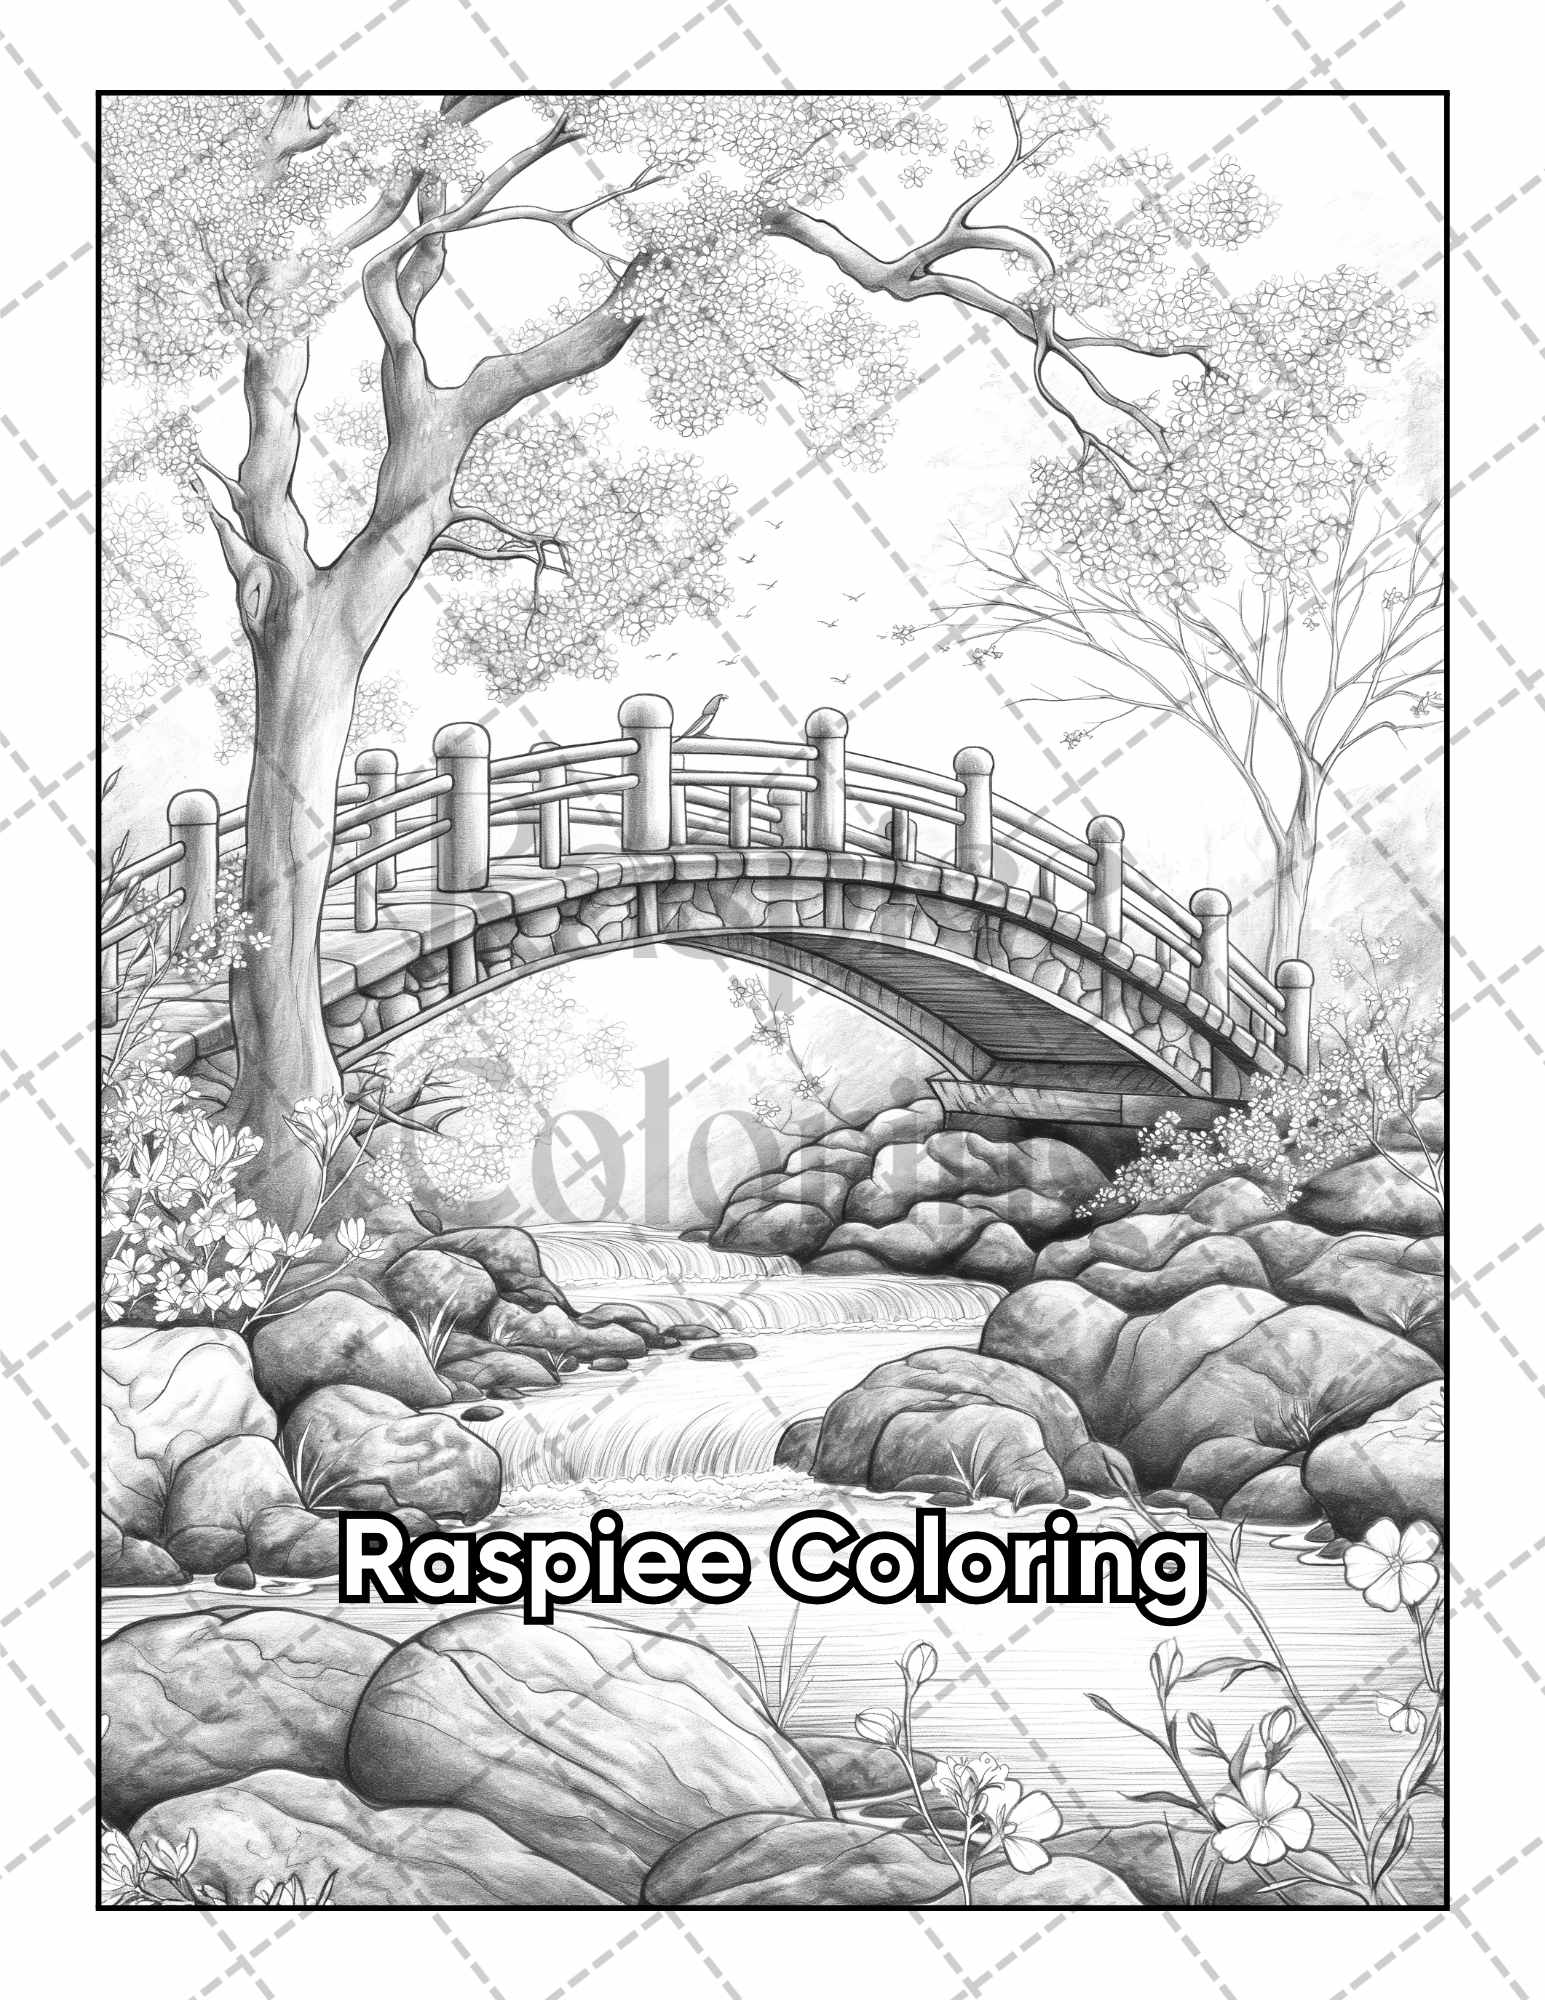 50 Spring Serenity Adult Coloring Pages - Printable PDF Instant Download for Stress Relief